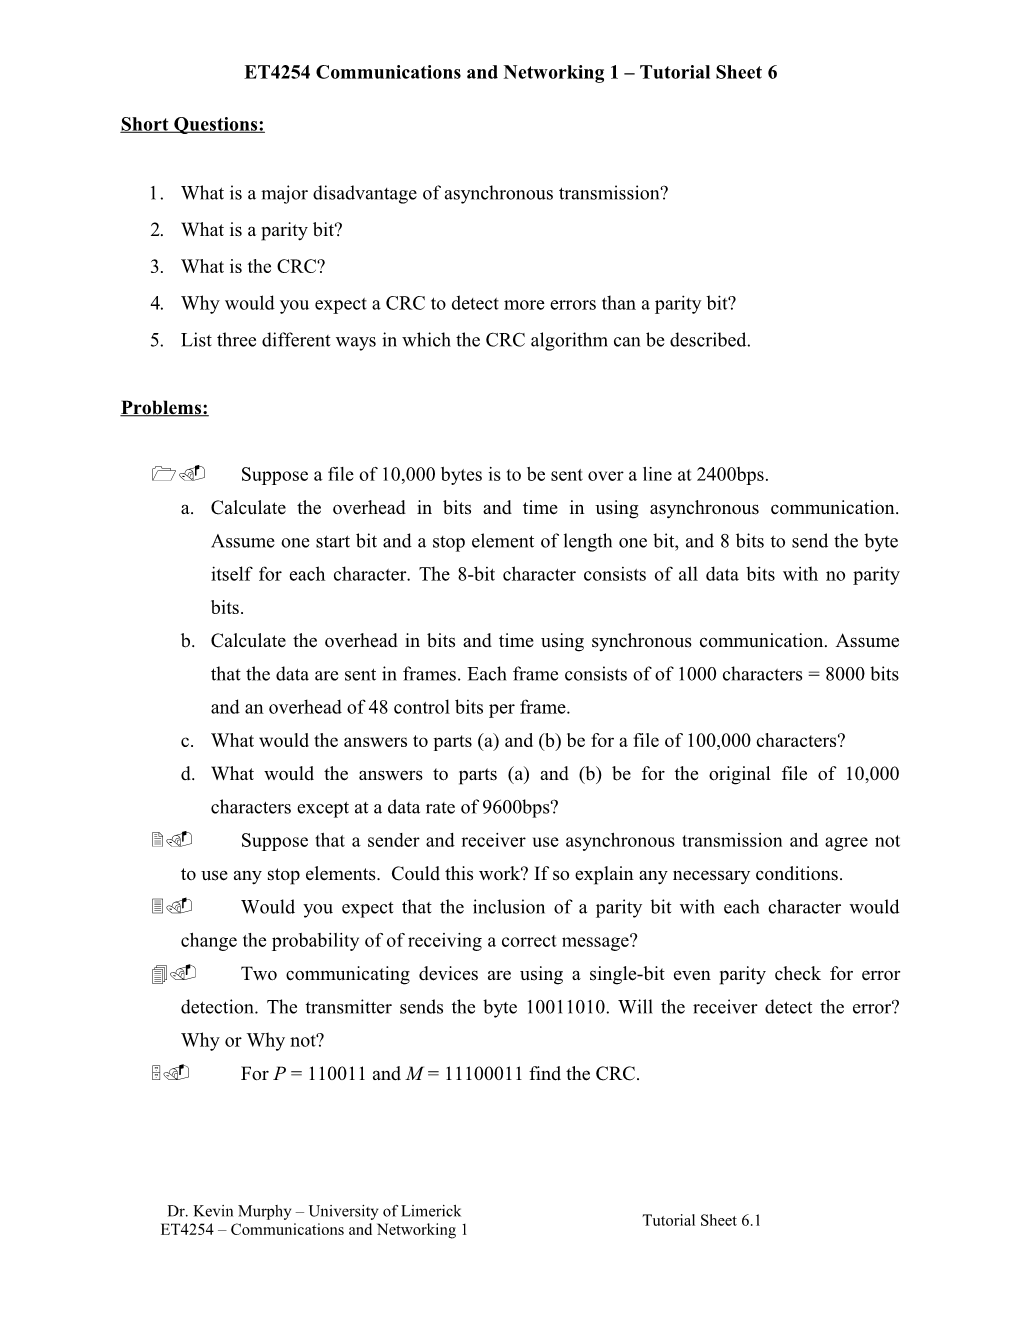 ET4254 Communications and Networking 1 Tutorial Sheet 6